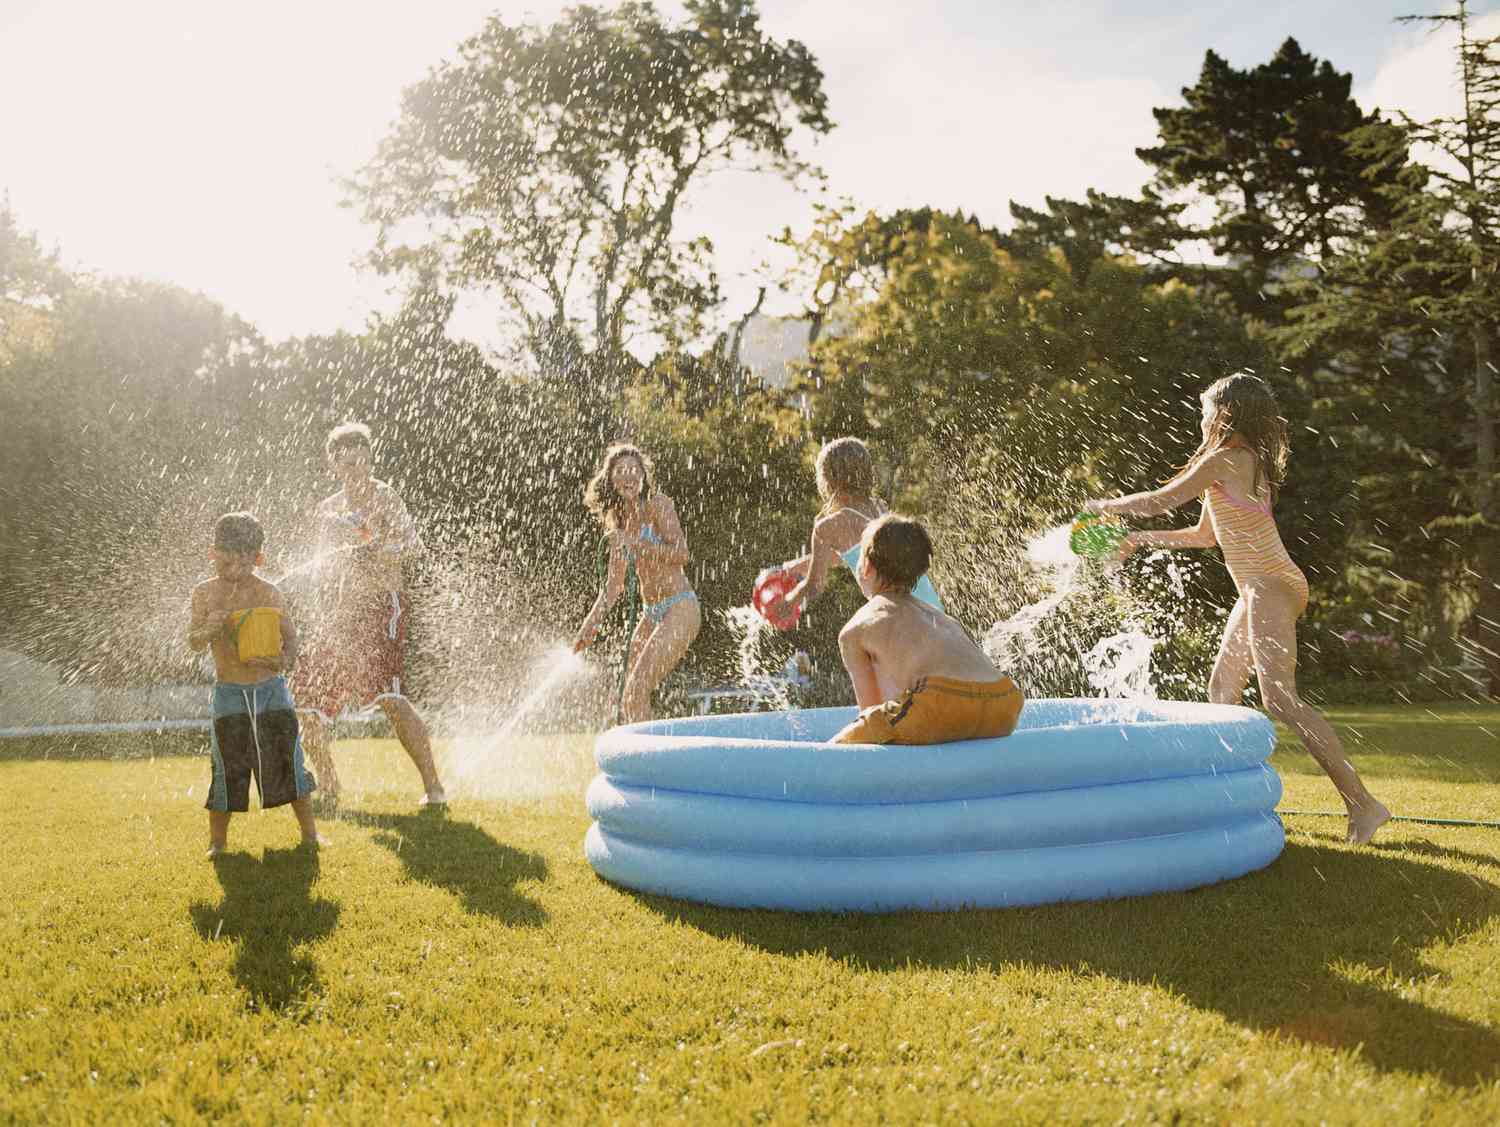 A blue kiddie pool on grass with kids having a water fight.